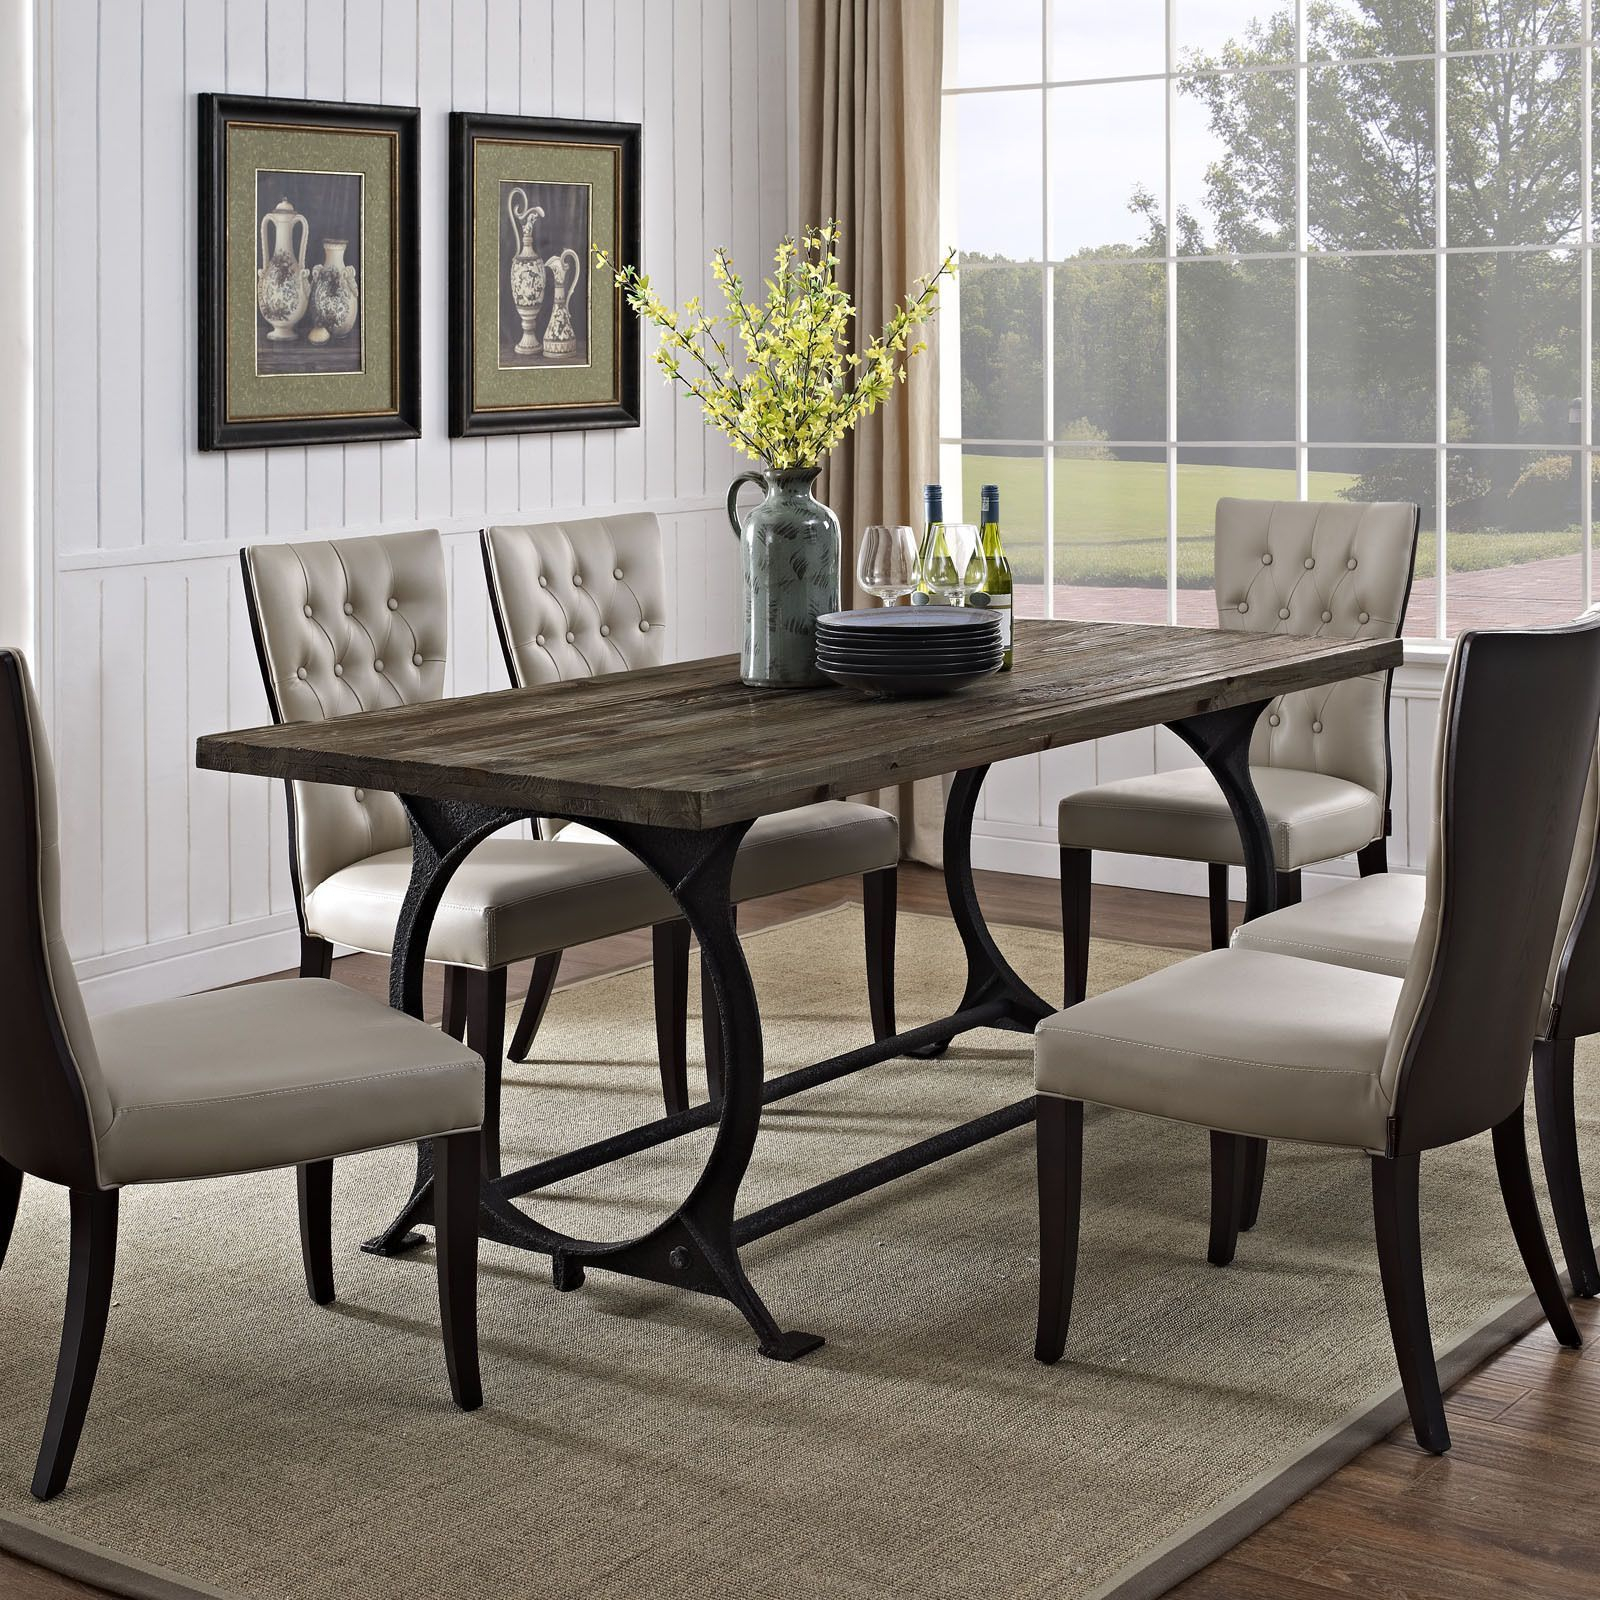 Effuse Wood Top Dining Table Brown In 2019 Dining Room intended for size 1600 X 1600